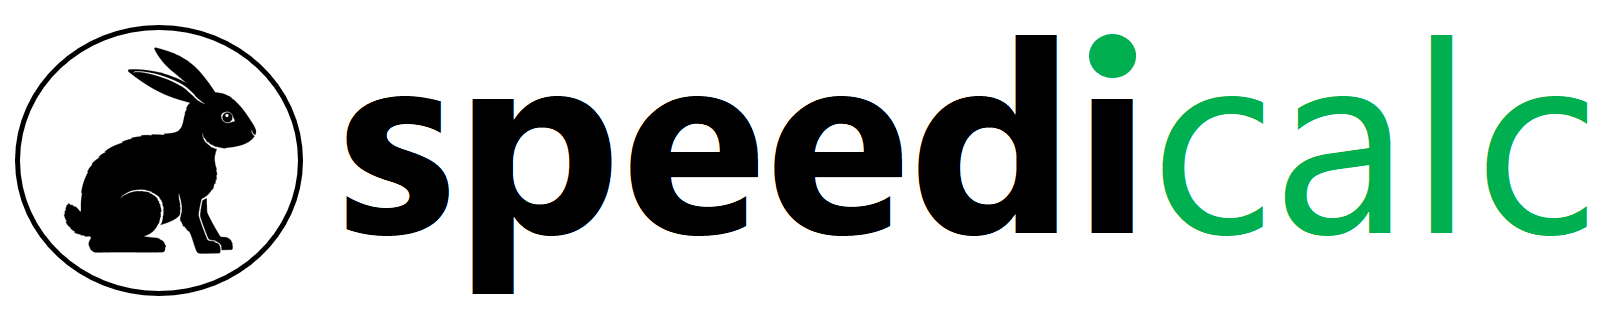 A black and white image of the word " ieee ".